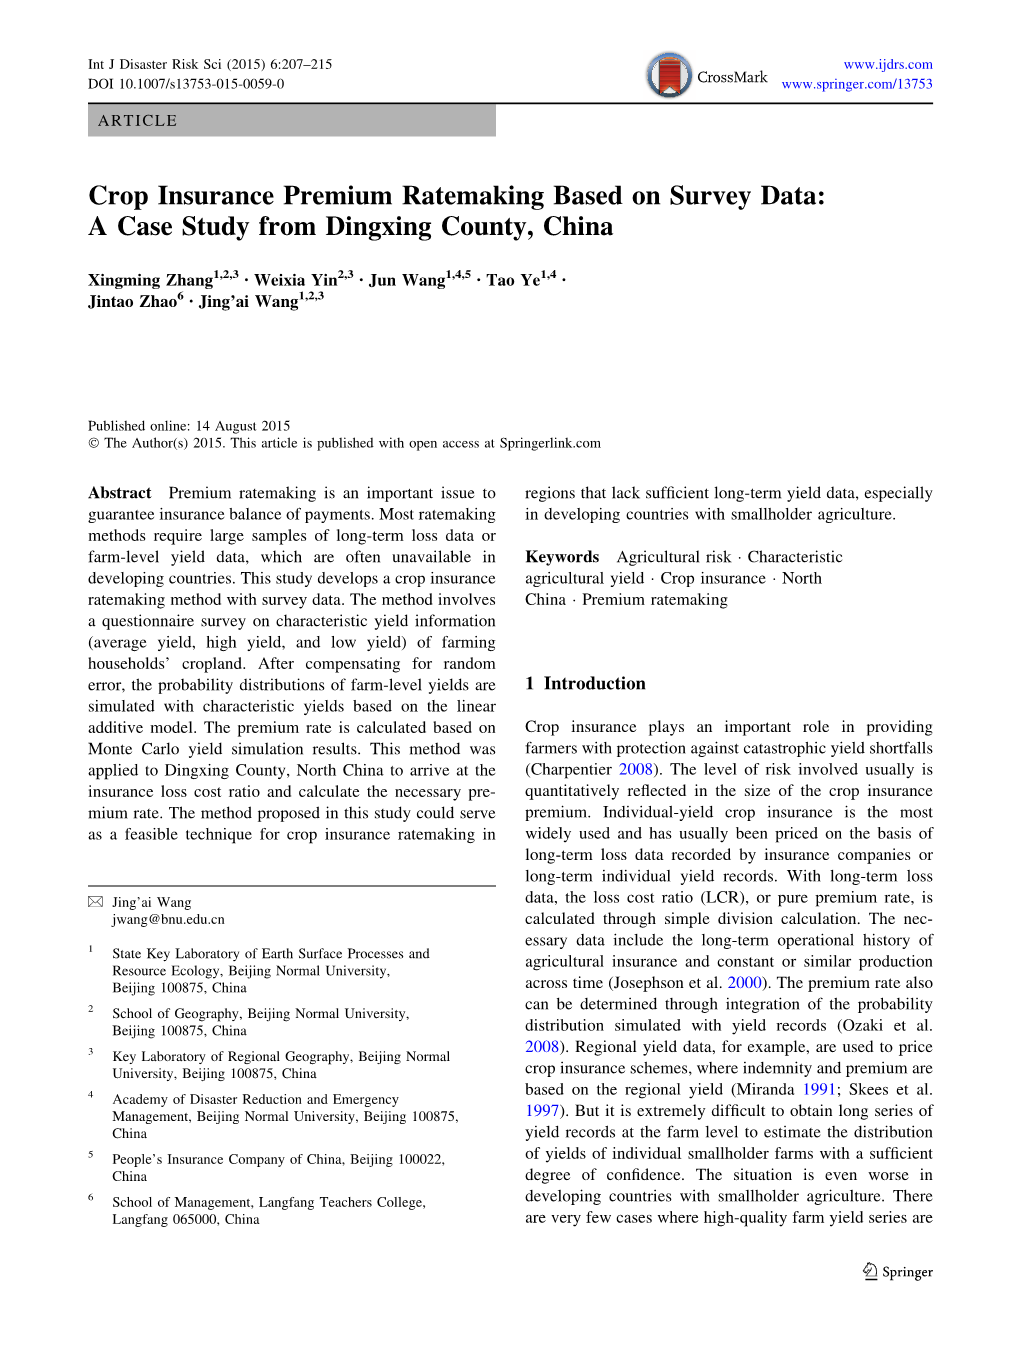 Crop Insurance Premium Ratemaking Based on Survey Data: a Case Study from Dingxing County, China